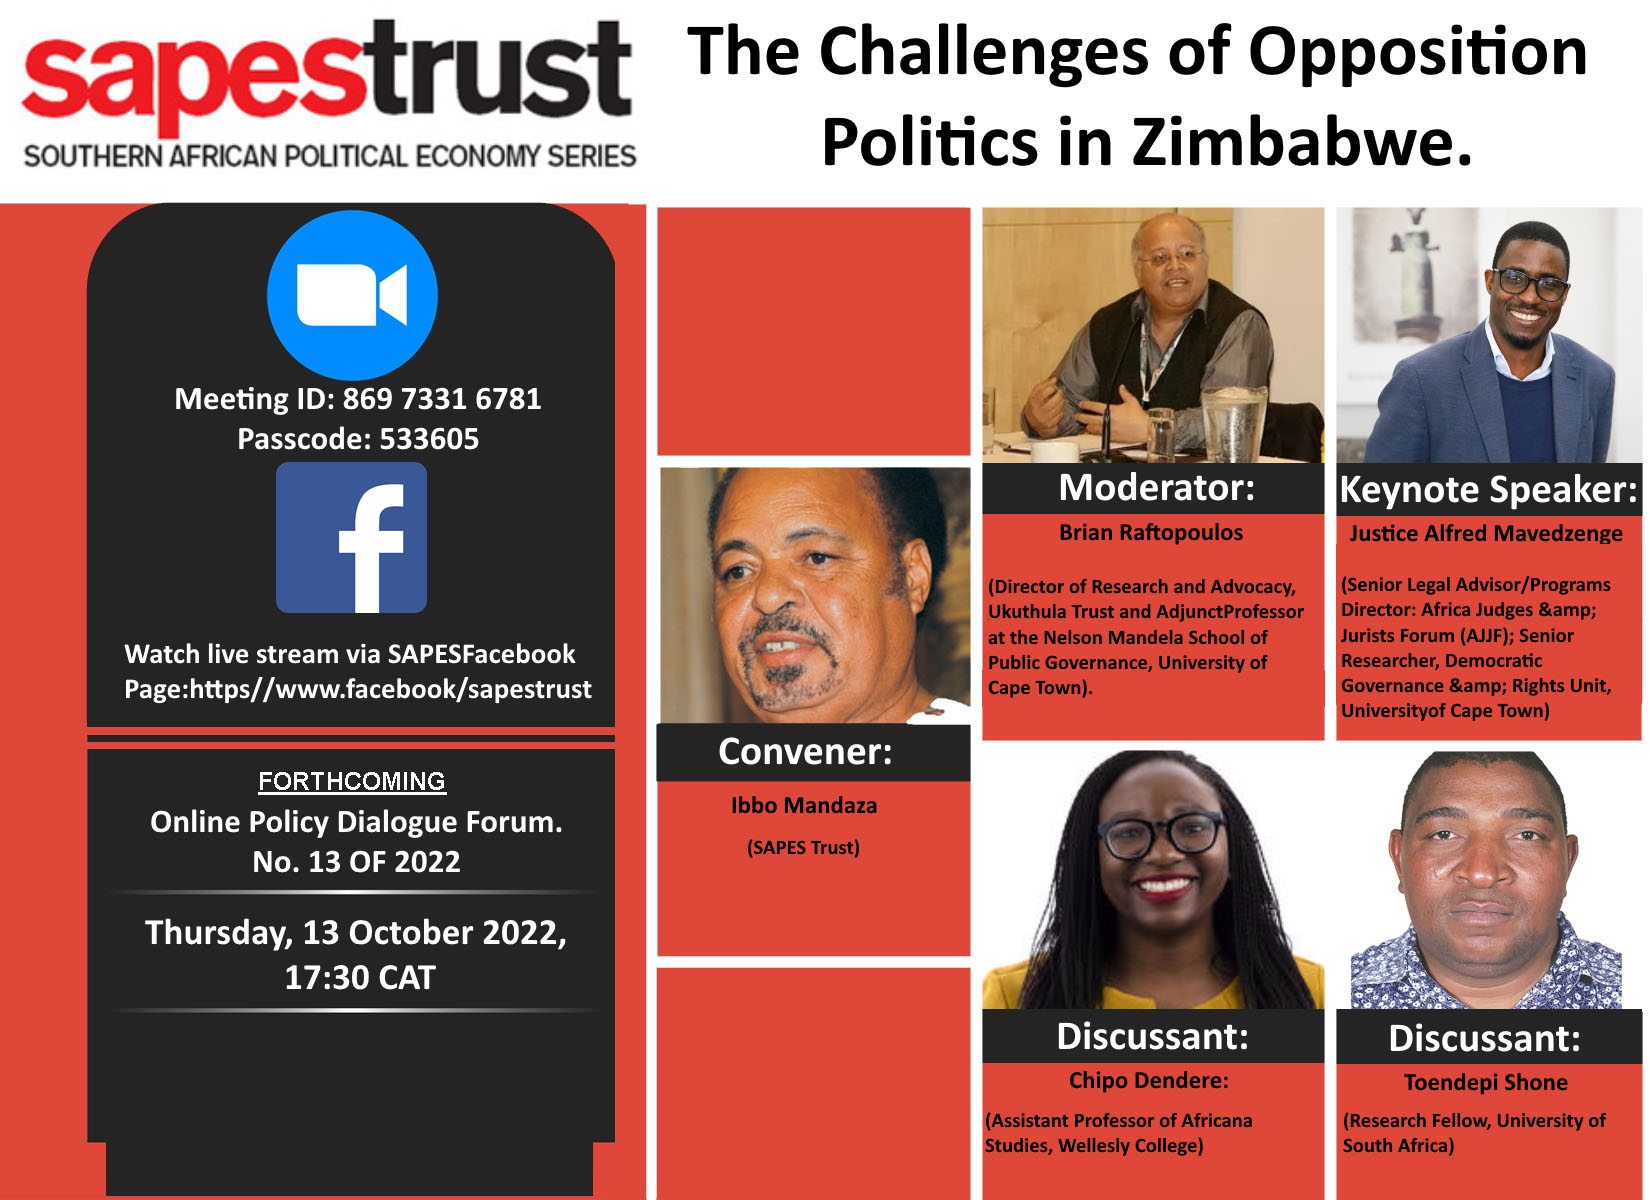 The Challenges of Opposition Politics in Zimbabwe